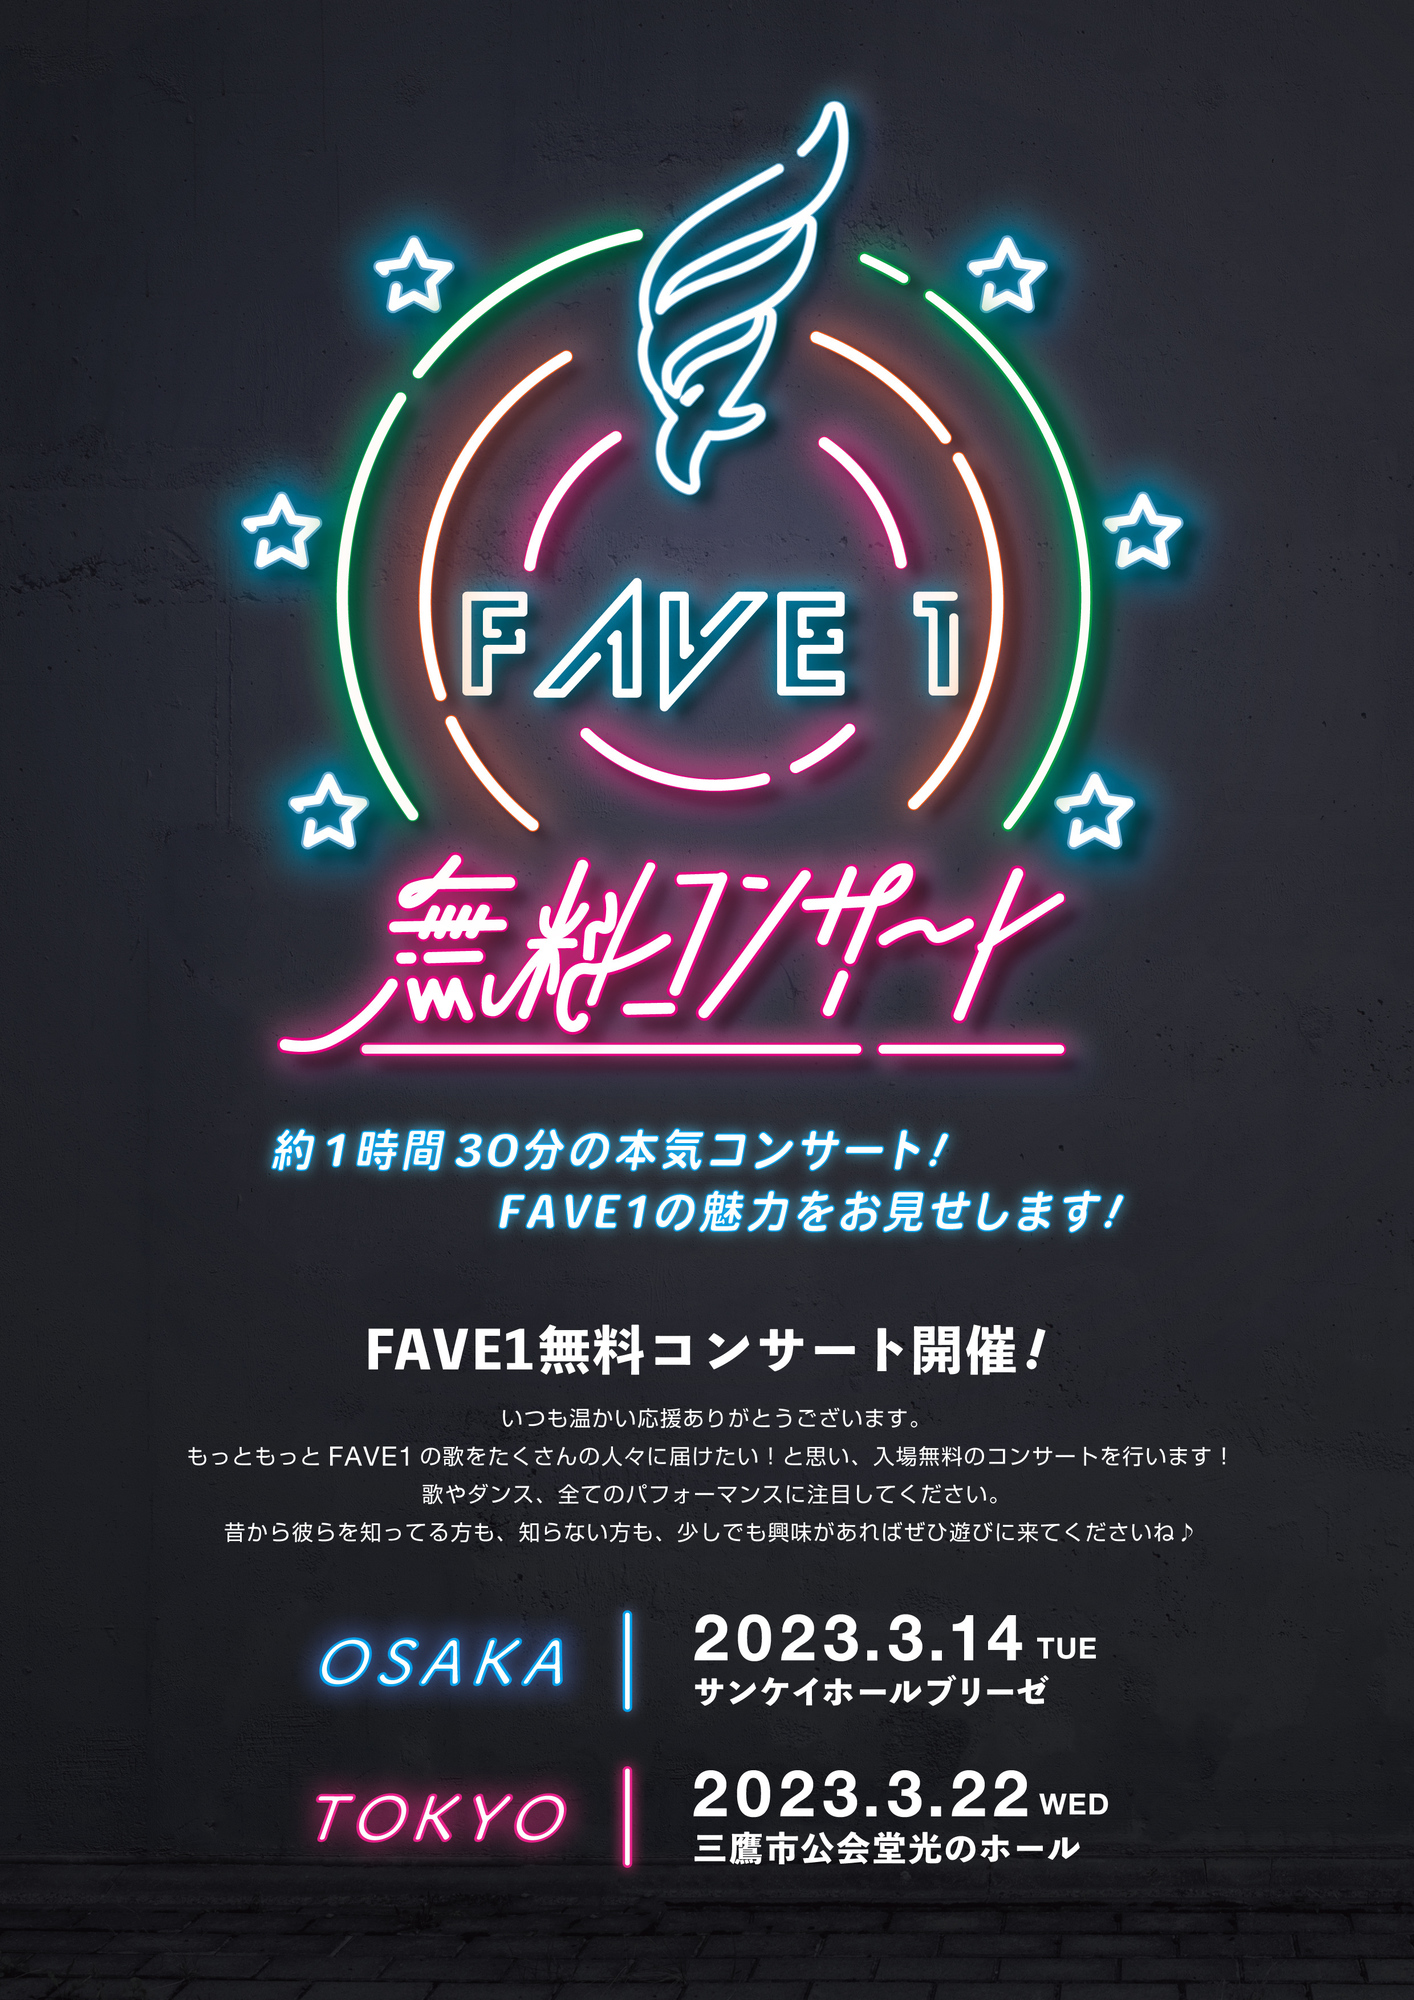 FAVE1 無料コンサート 開催🎵